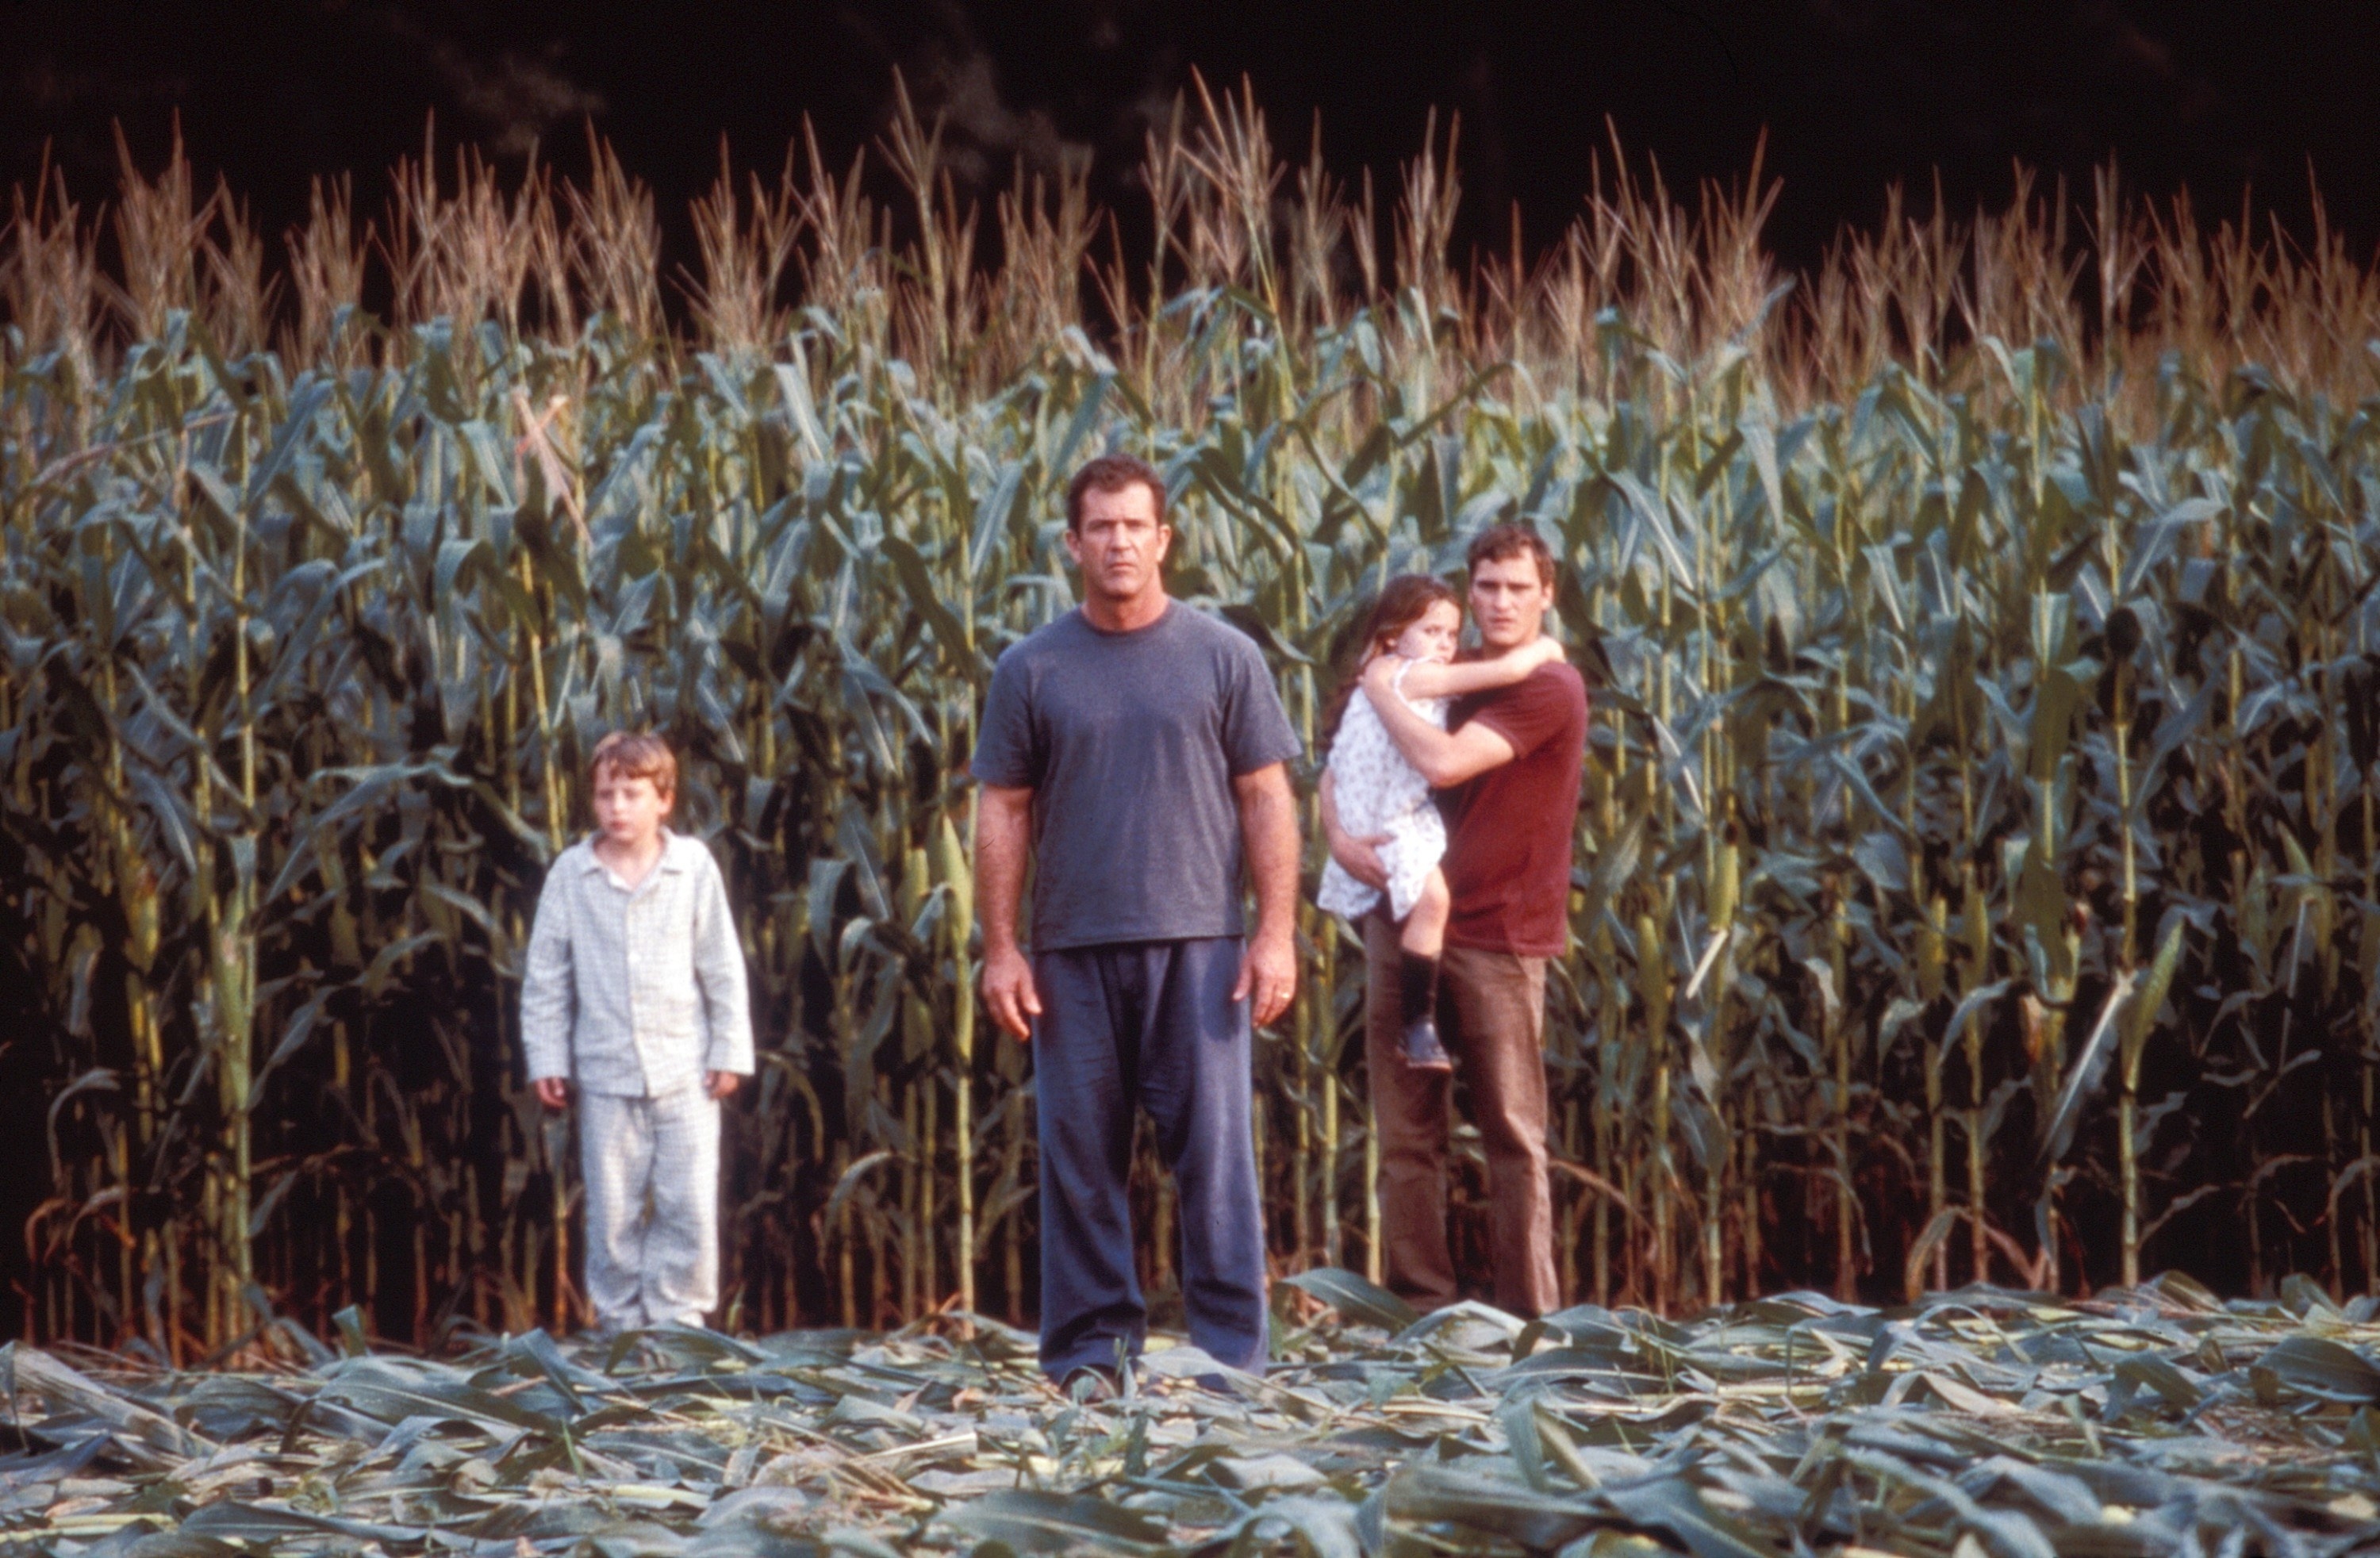 Rory Culkin, Mel Gibson, Abigail Breslin, and Joaquin Phoenix look at a crop circle in a field of corn